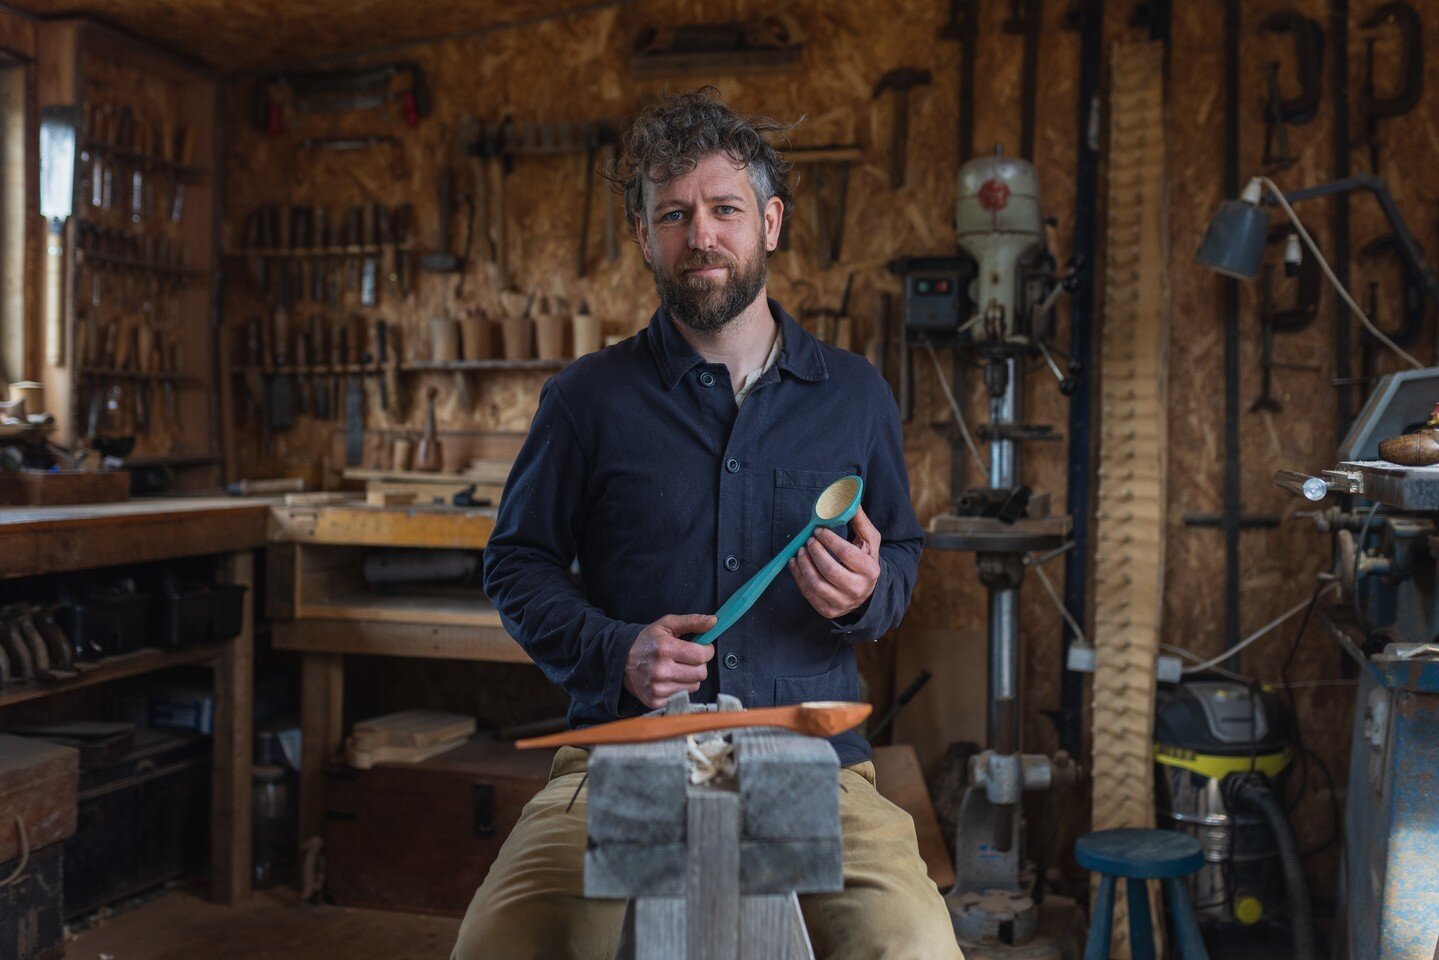 When @steweeggs set out to break the world record for the world's longest egg and spoon race, they knew they couldn't use just any old spoon.
ㅤ
Enter, the @cornishwoodsmith
ㅤ
A talented craftsman committed to working with nature, Dom uses age-old tra